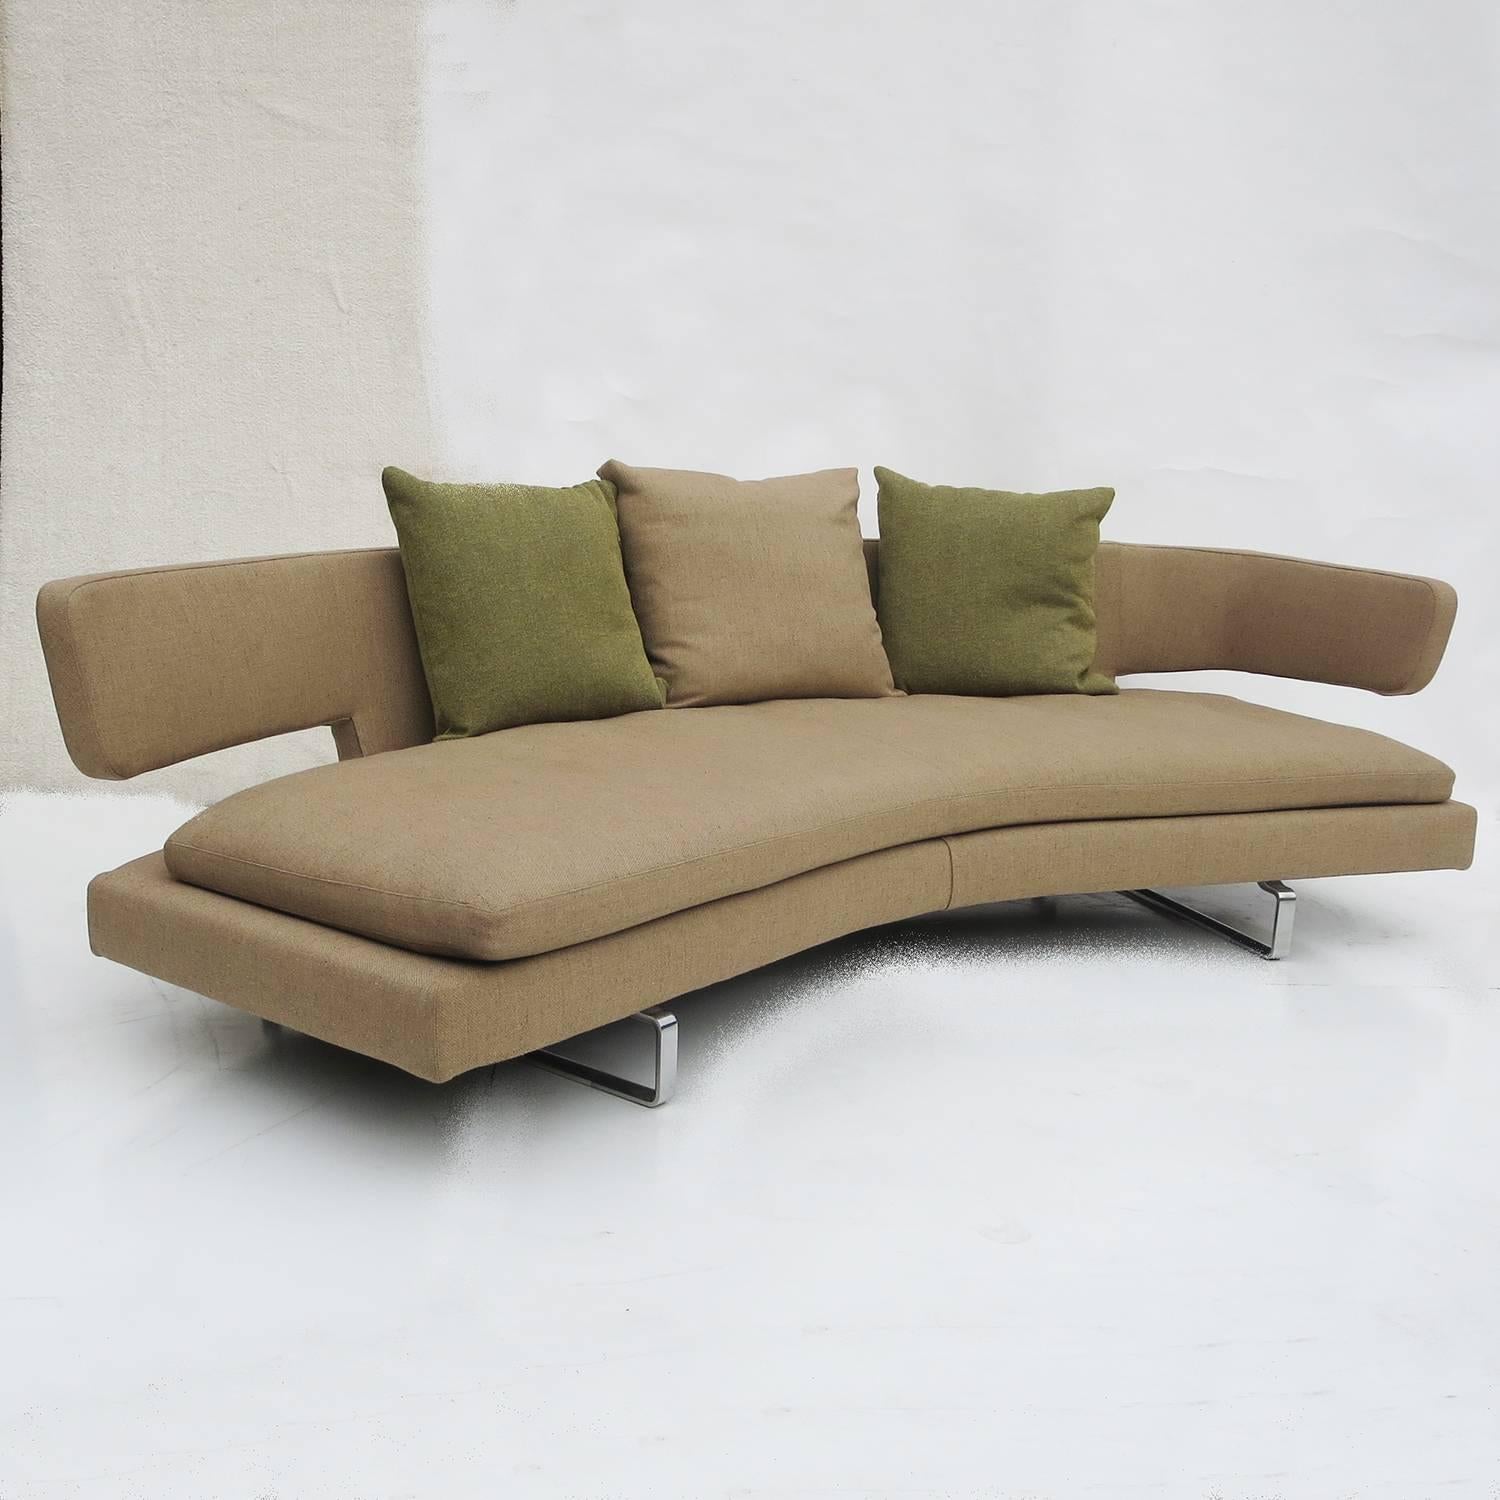 Created for B & B Italia in 2005 by Italian designer Antonio Citterio. This is the smaller of two Citterio sofas we have. This version features two open end arms, and chrome legs. The sofa is in excellent original condition, and will be steam